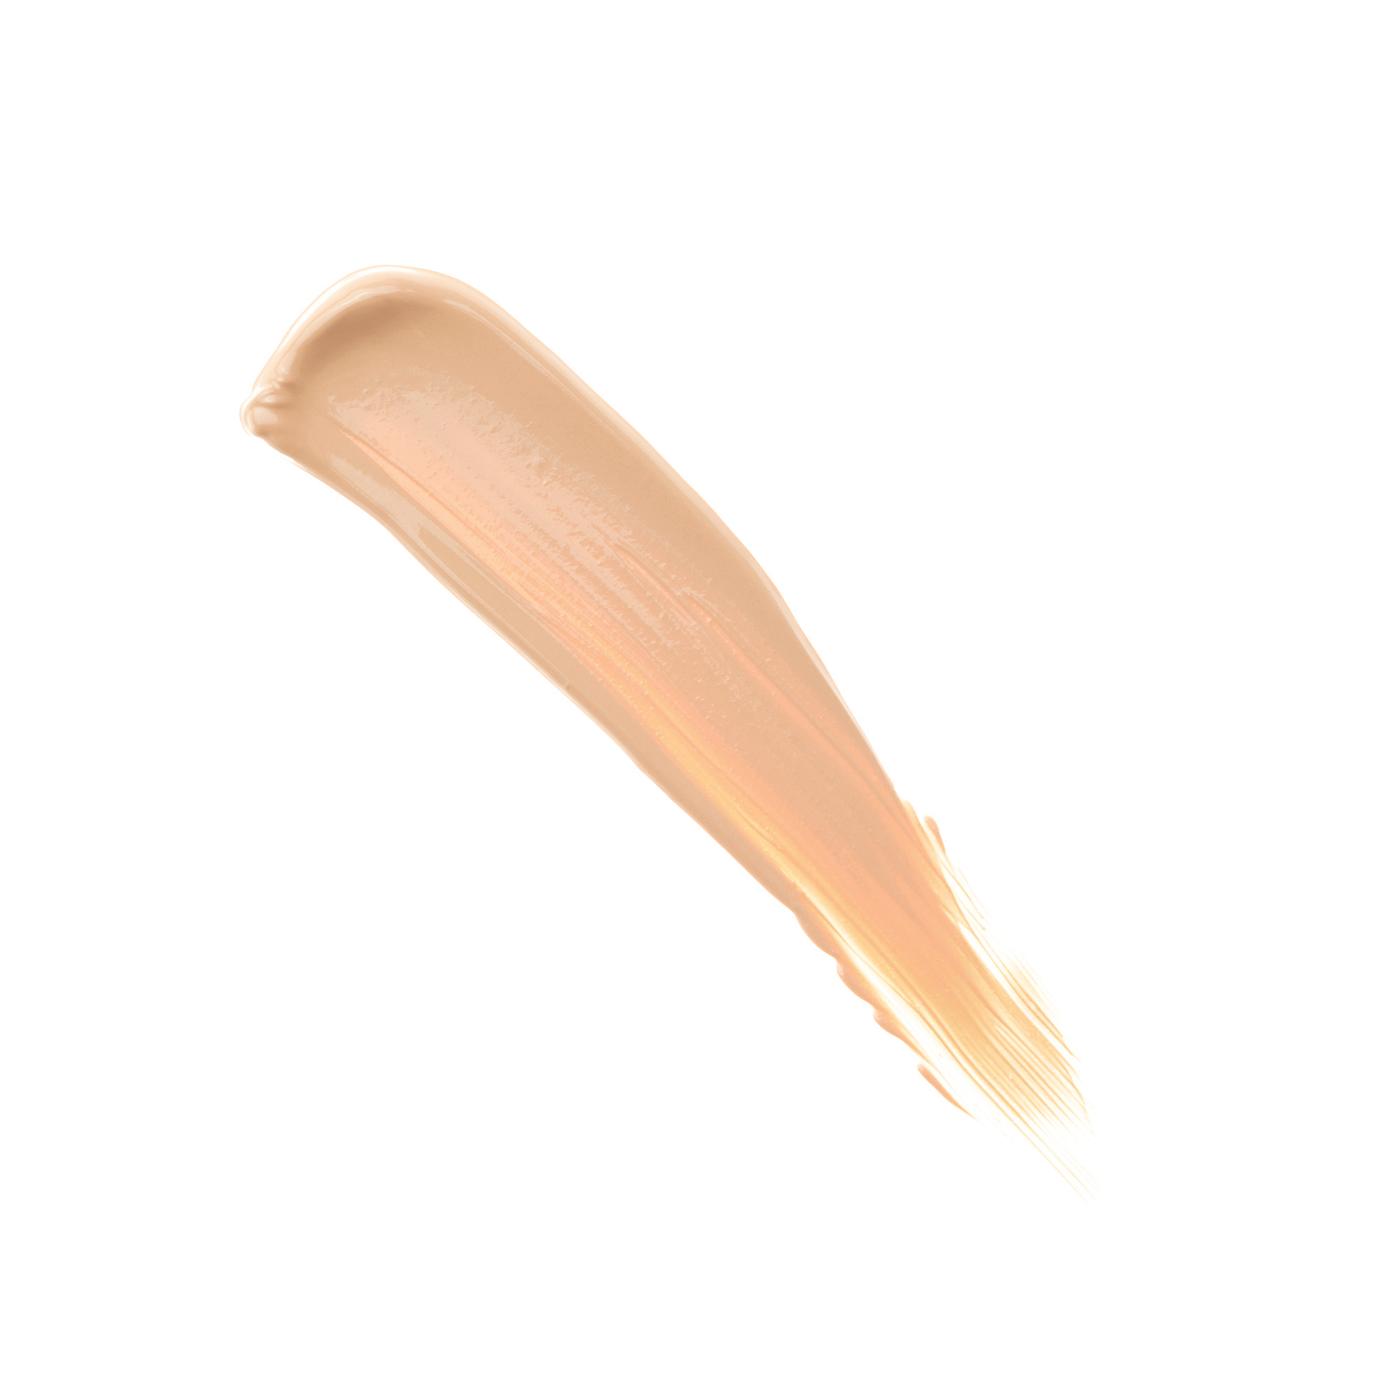 Milani Conceal +Perfect Longwear Concealer - Light Natural; image 2 of 6